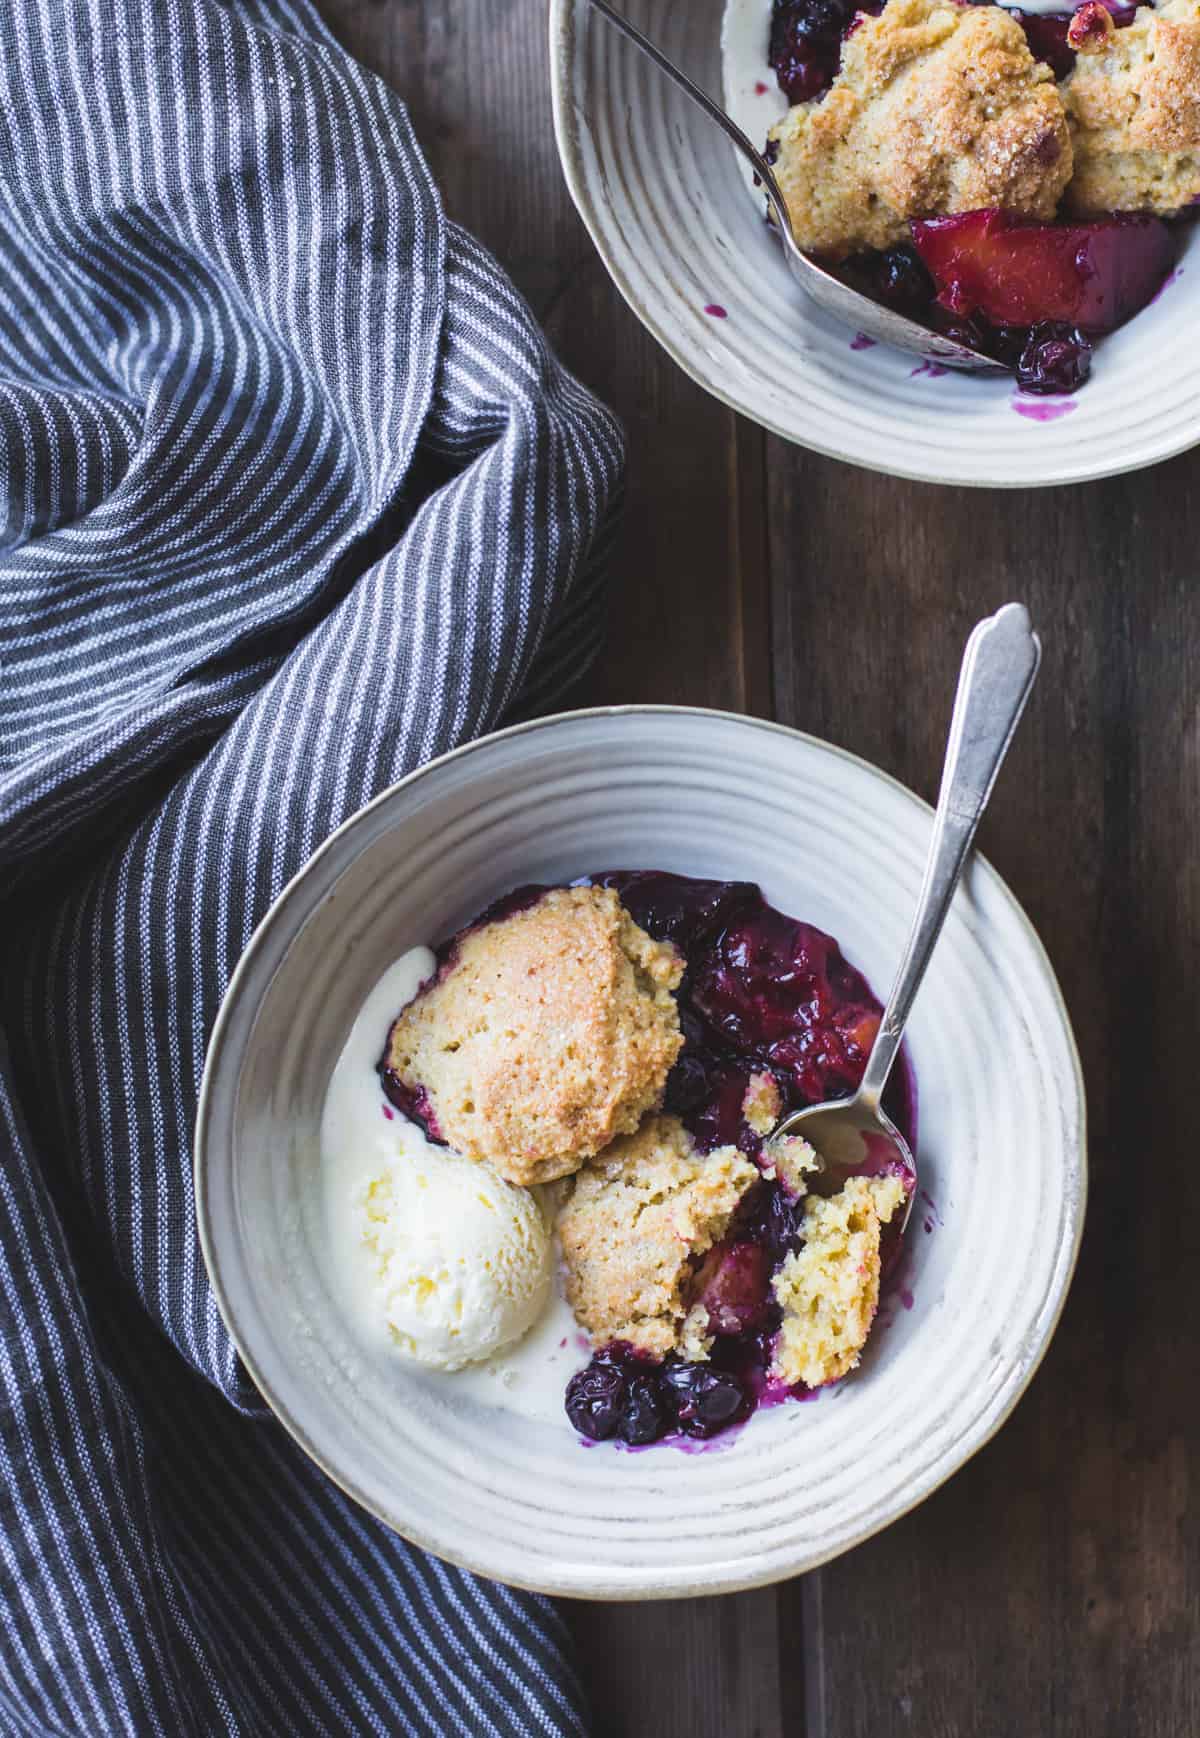 2 bowls of Gluten-Free Blueberry Plum Cobbler with Corn Flour Biscuits